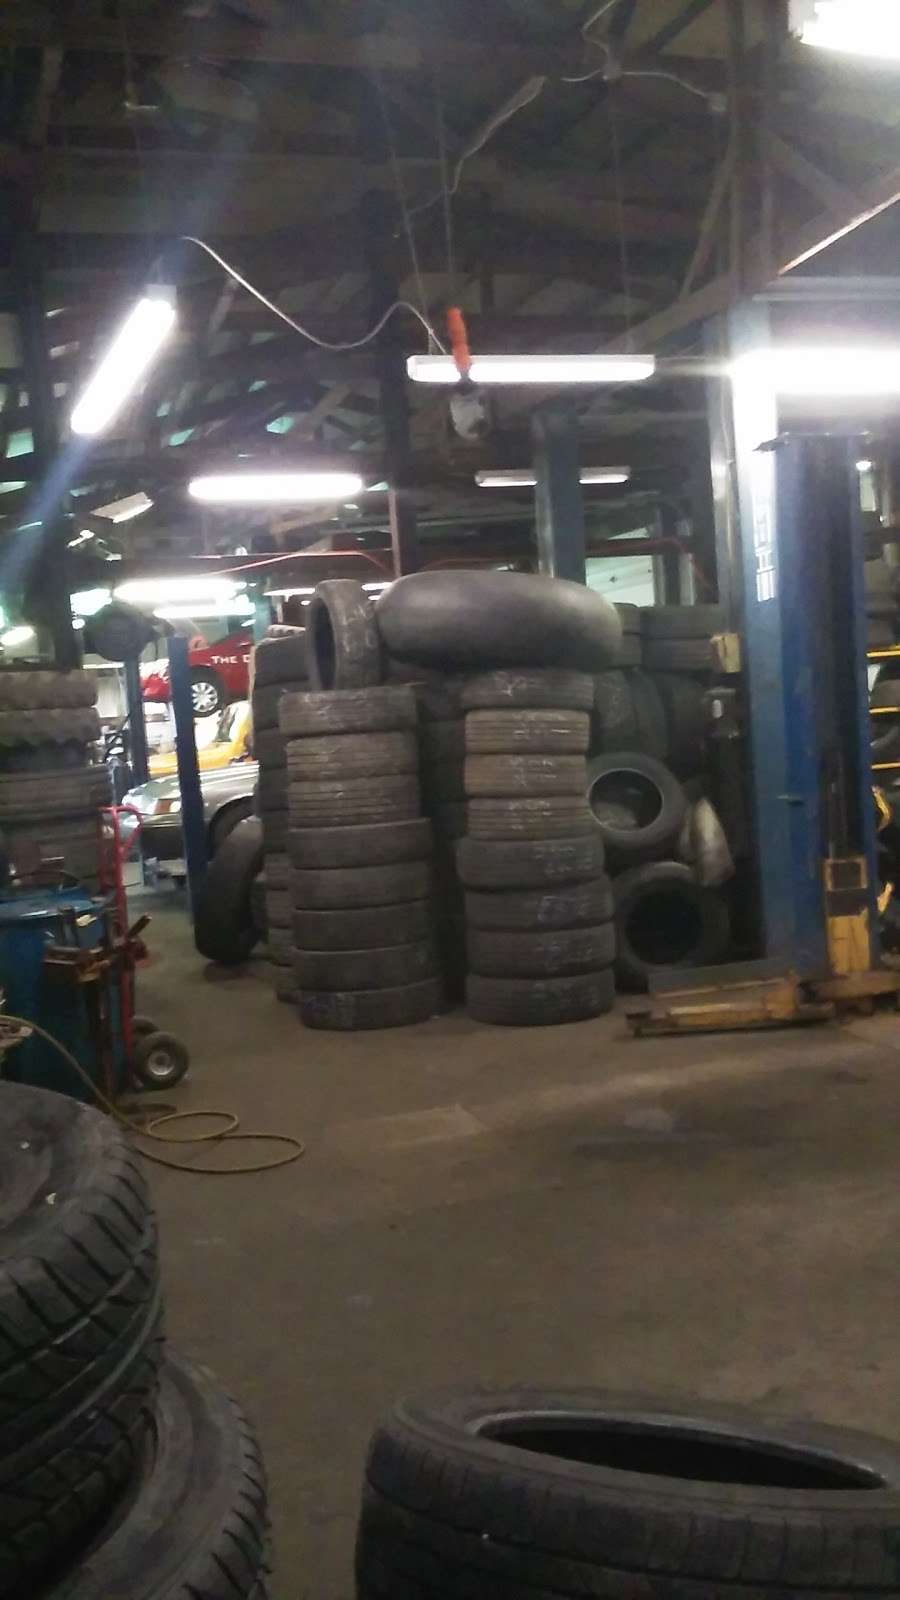 Don Miller Tire | Photo 4 of 4 | Address: 1624 Ohio Ave, Anderson, IN 46016, USA | Phone: (765) 644-6621